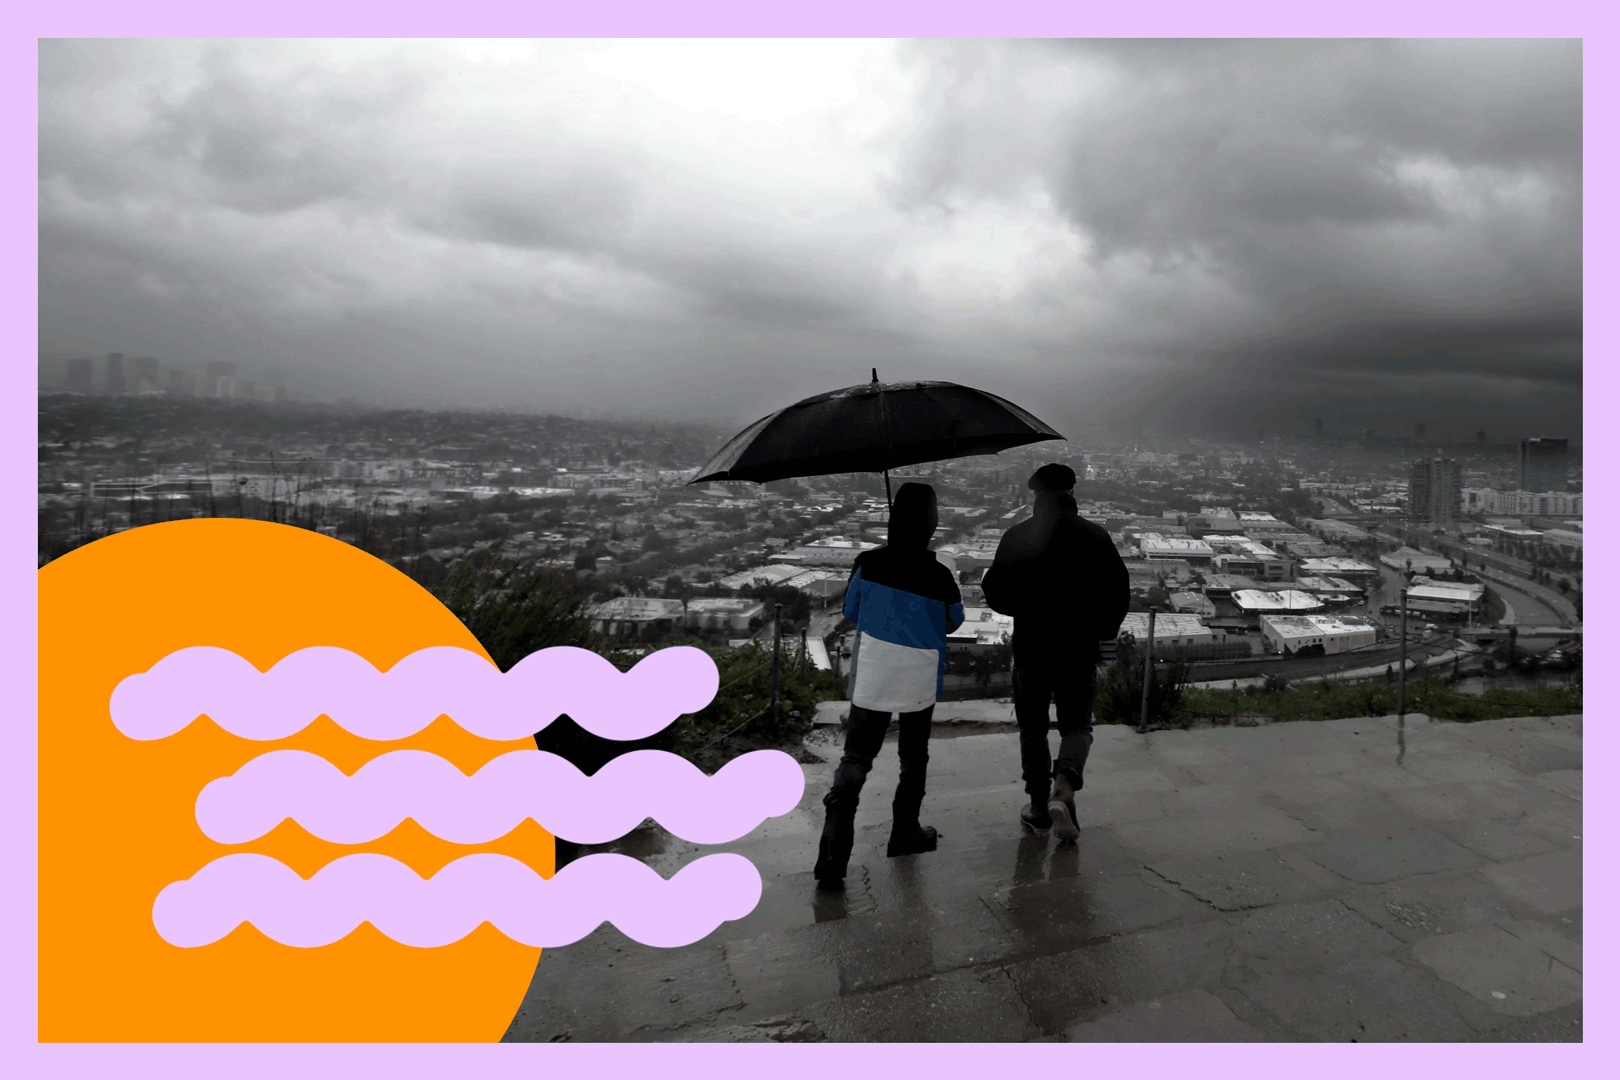 Warren and his son Johnny take in the view of a passing storm from the Baldwin Hills Scenic Overlook in Culver City